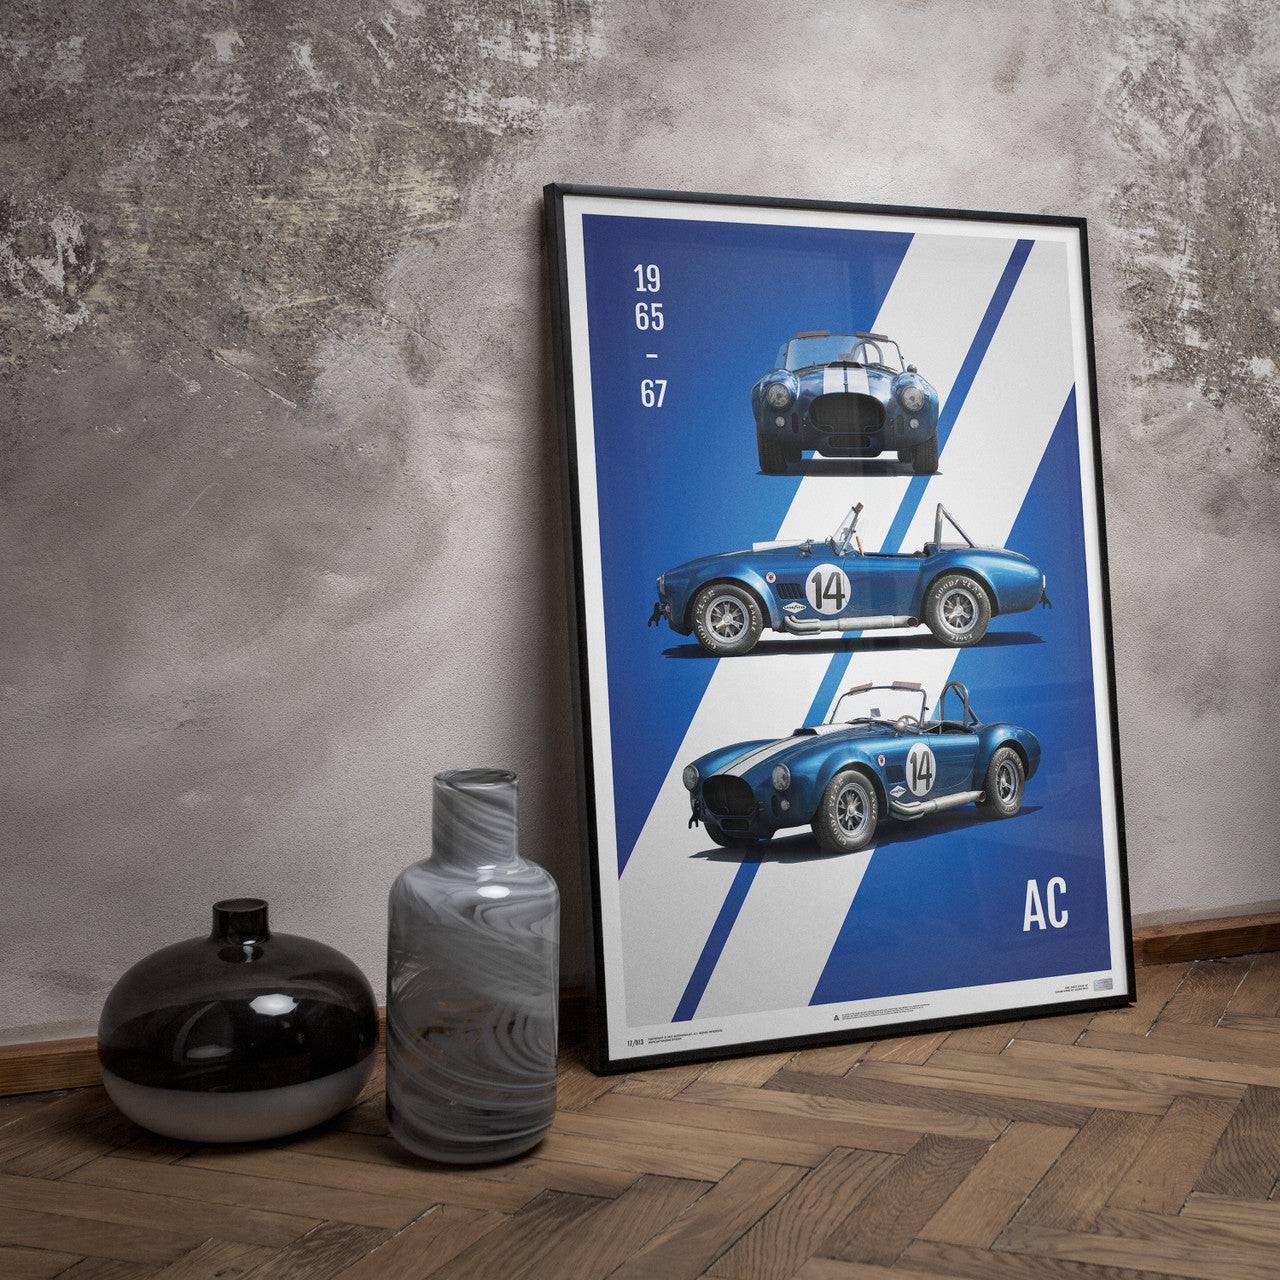 Shelby-Ford AC Cobra Mk III - Blue - 1965 - Limited Poster